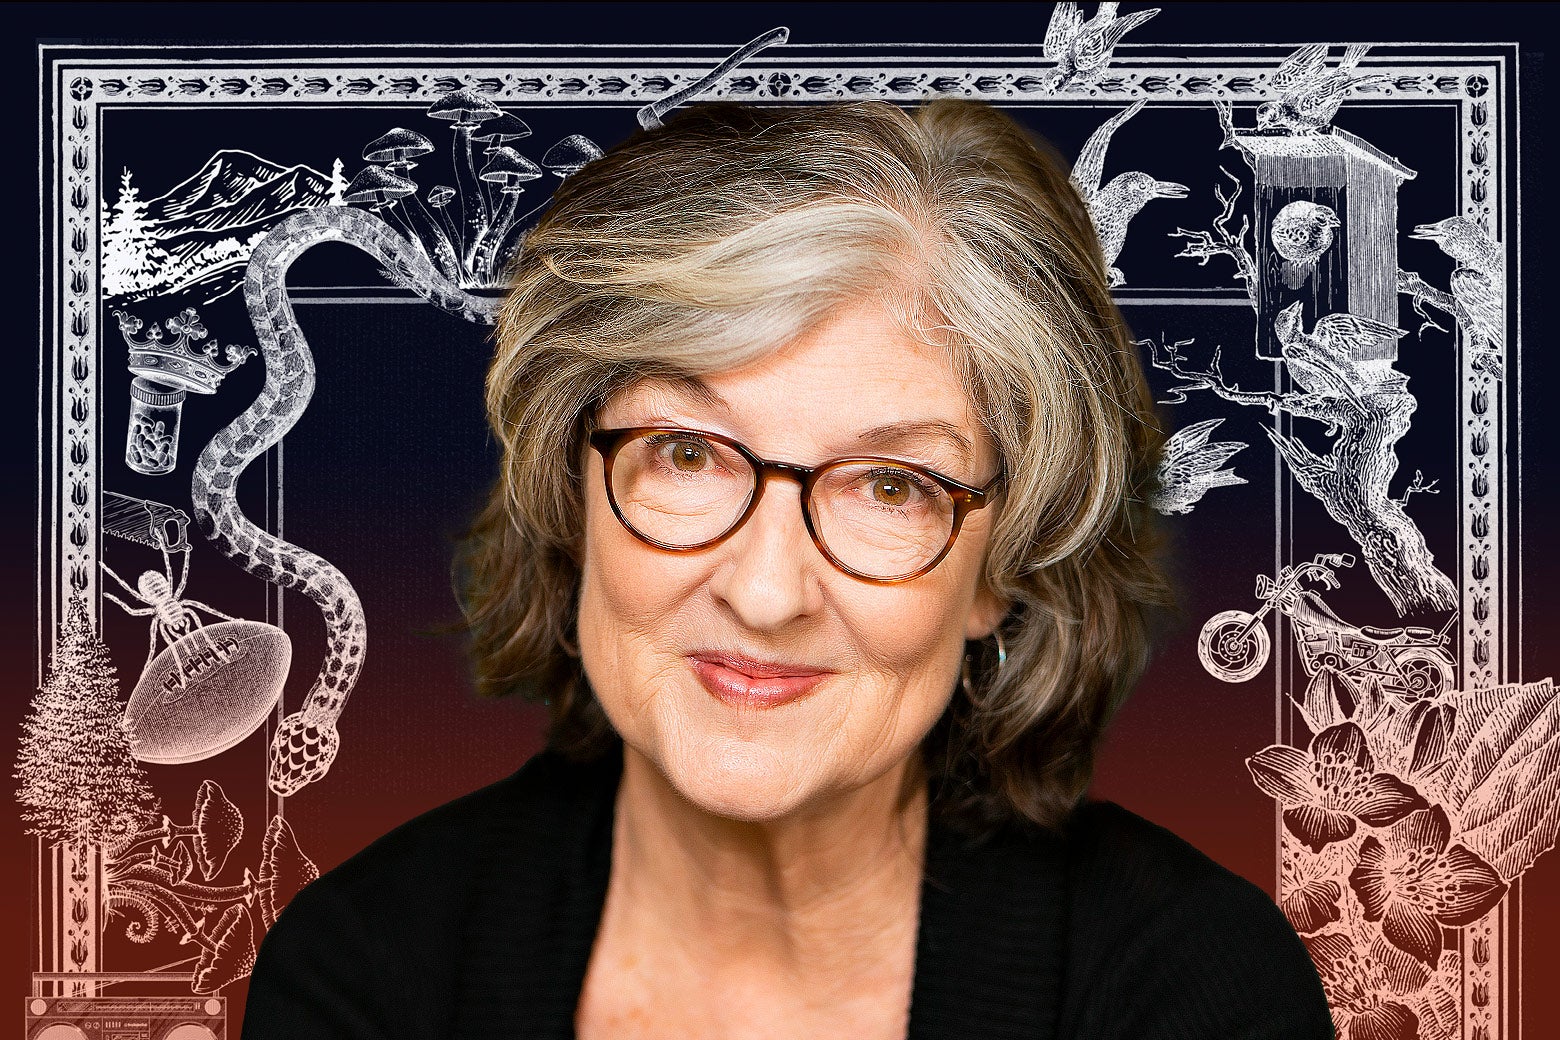 A headshot of Barbara Kingsolver overlayed on a frame of a miscellaneous items.